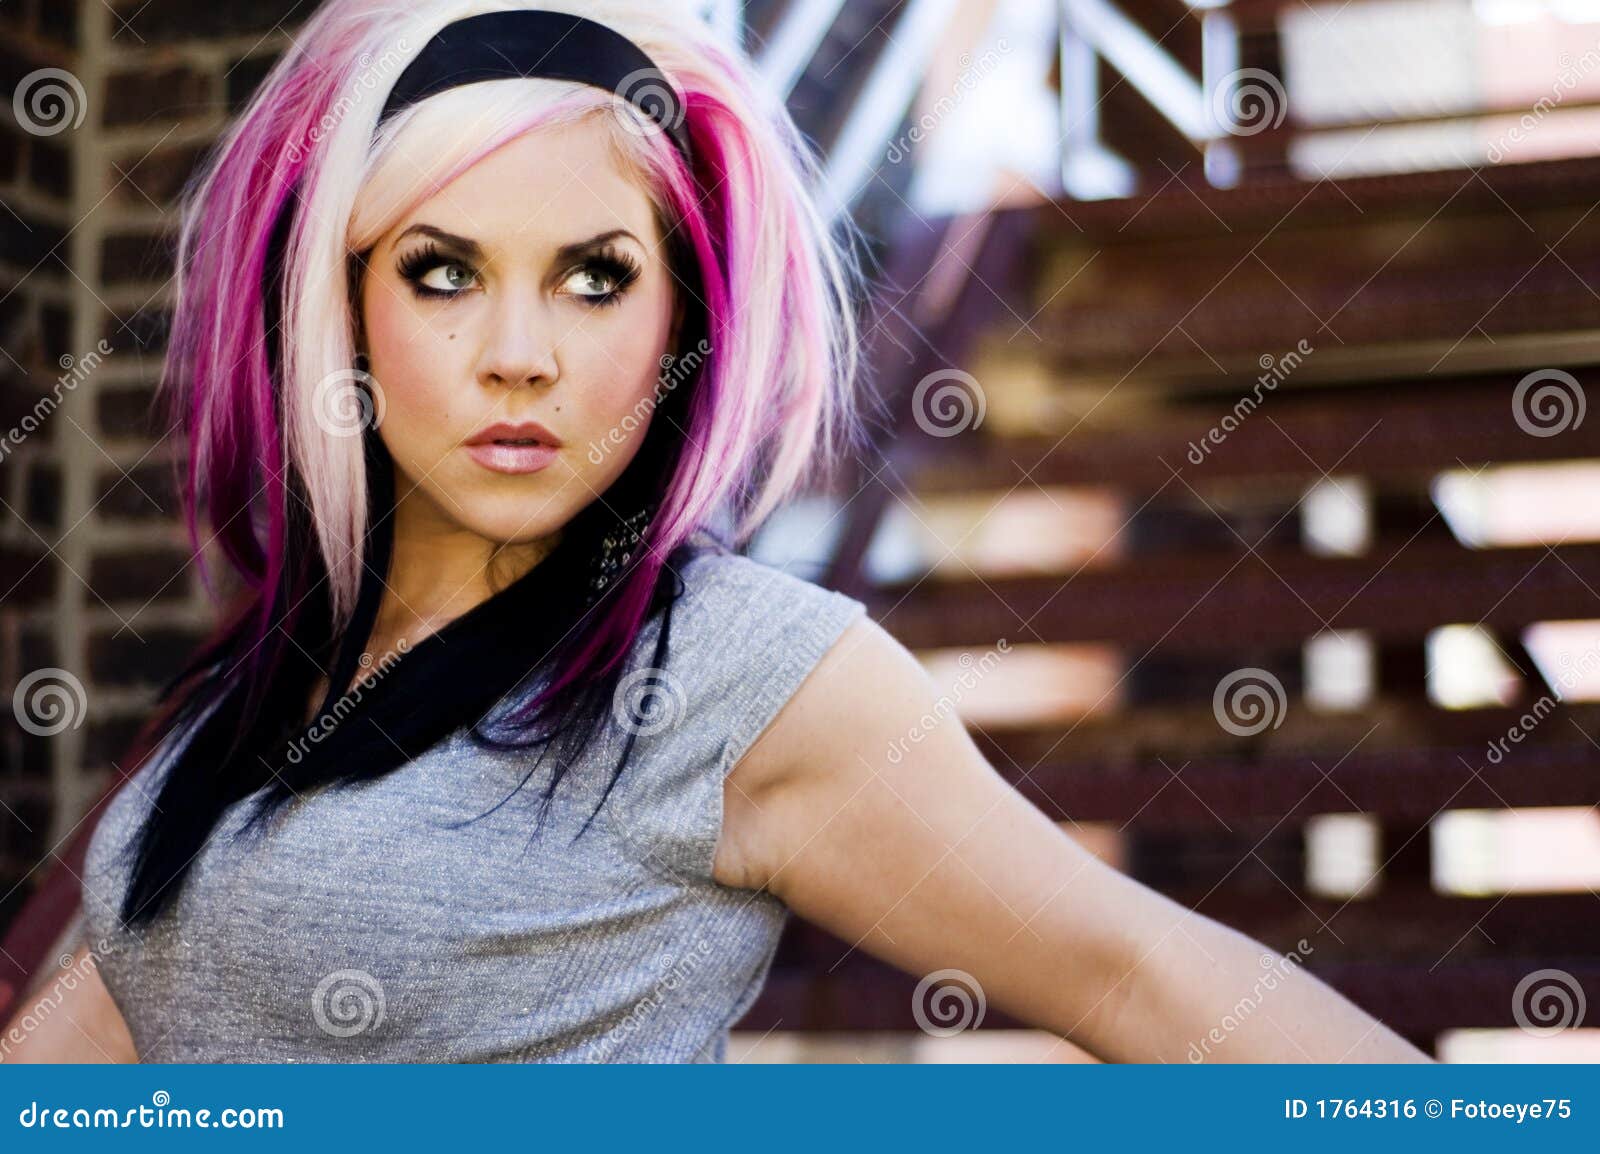 Download this Royalty Free Stock Image Sexy Girl Punk Fashion Model picture